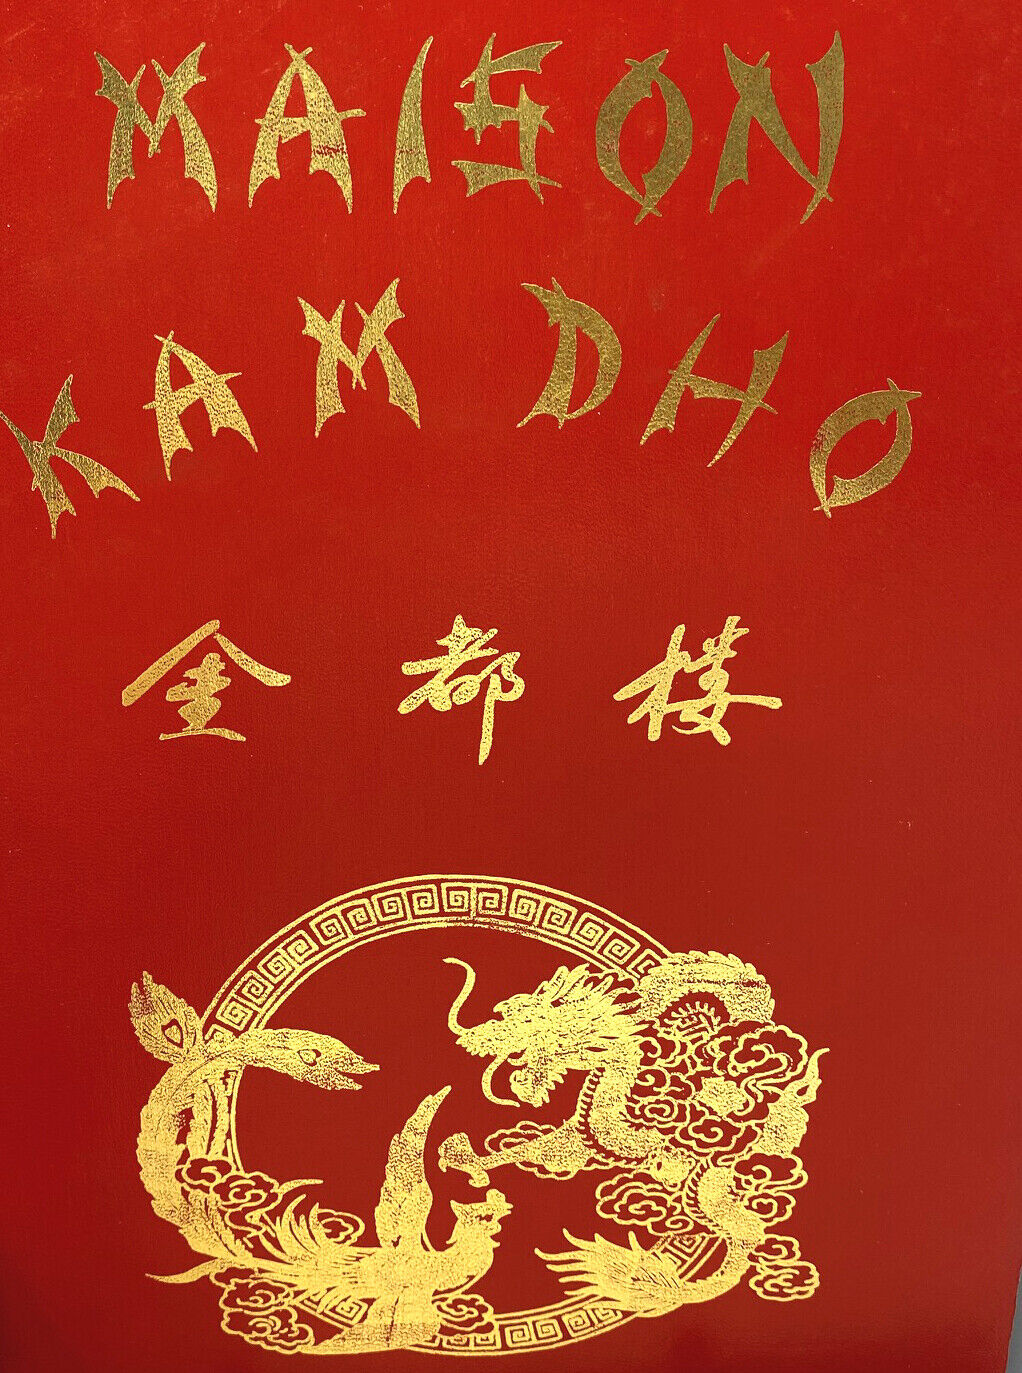 1970s Maison Kam Dho Chinese Restaurant Polynesian Drink Menu Montreal Quebec